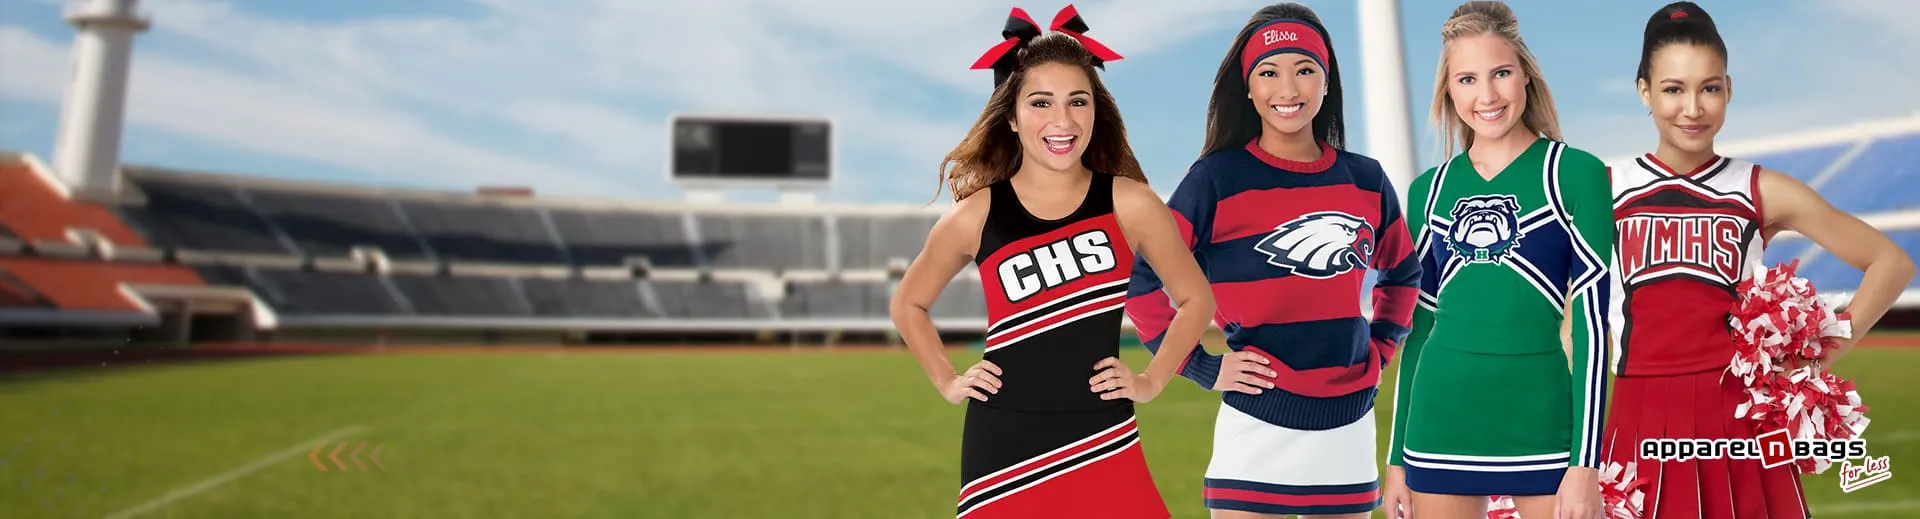 Shop Custom Cheerleading Outfits & Dance Uniforms in Mississauga